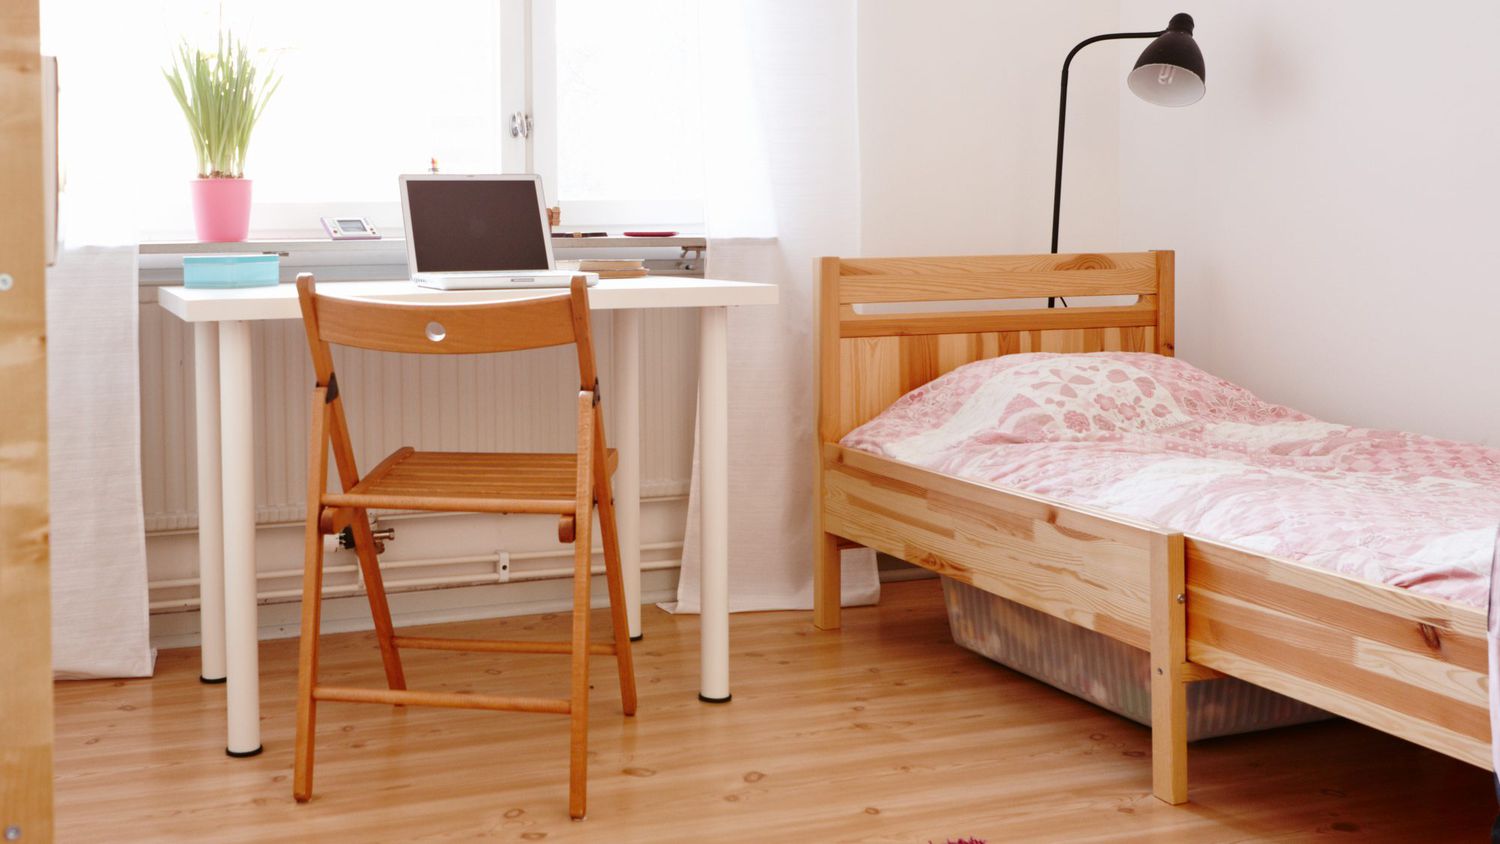 12 Ways To Maximize Dorm Space Without, How To Set Up A College Dorm Bedroom